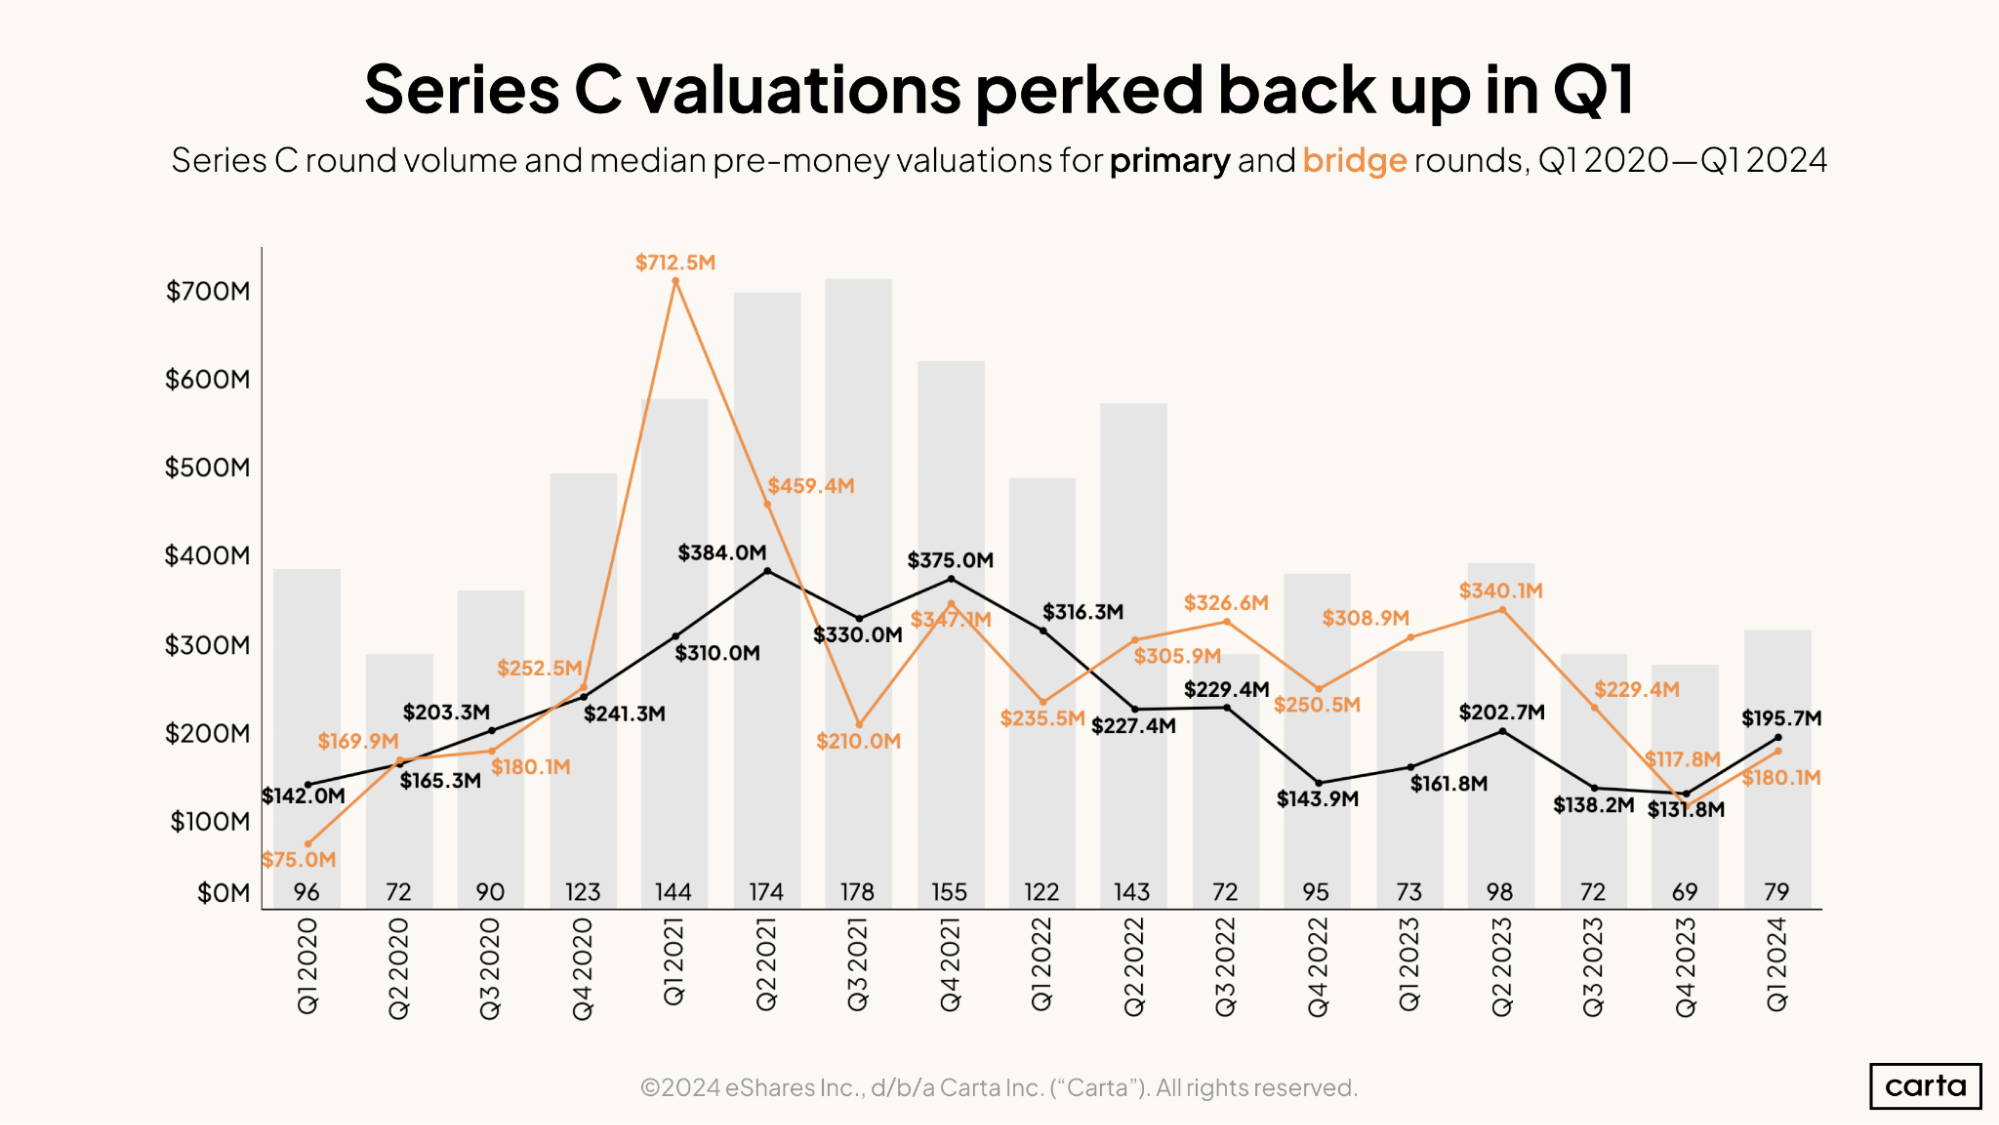 Series C valuations perked back up in Q1